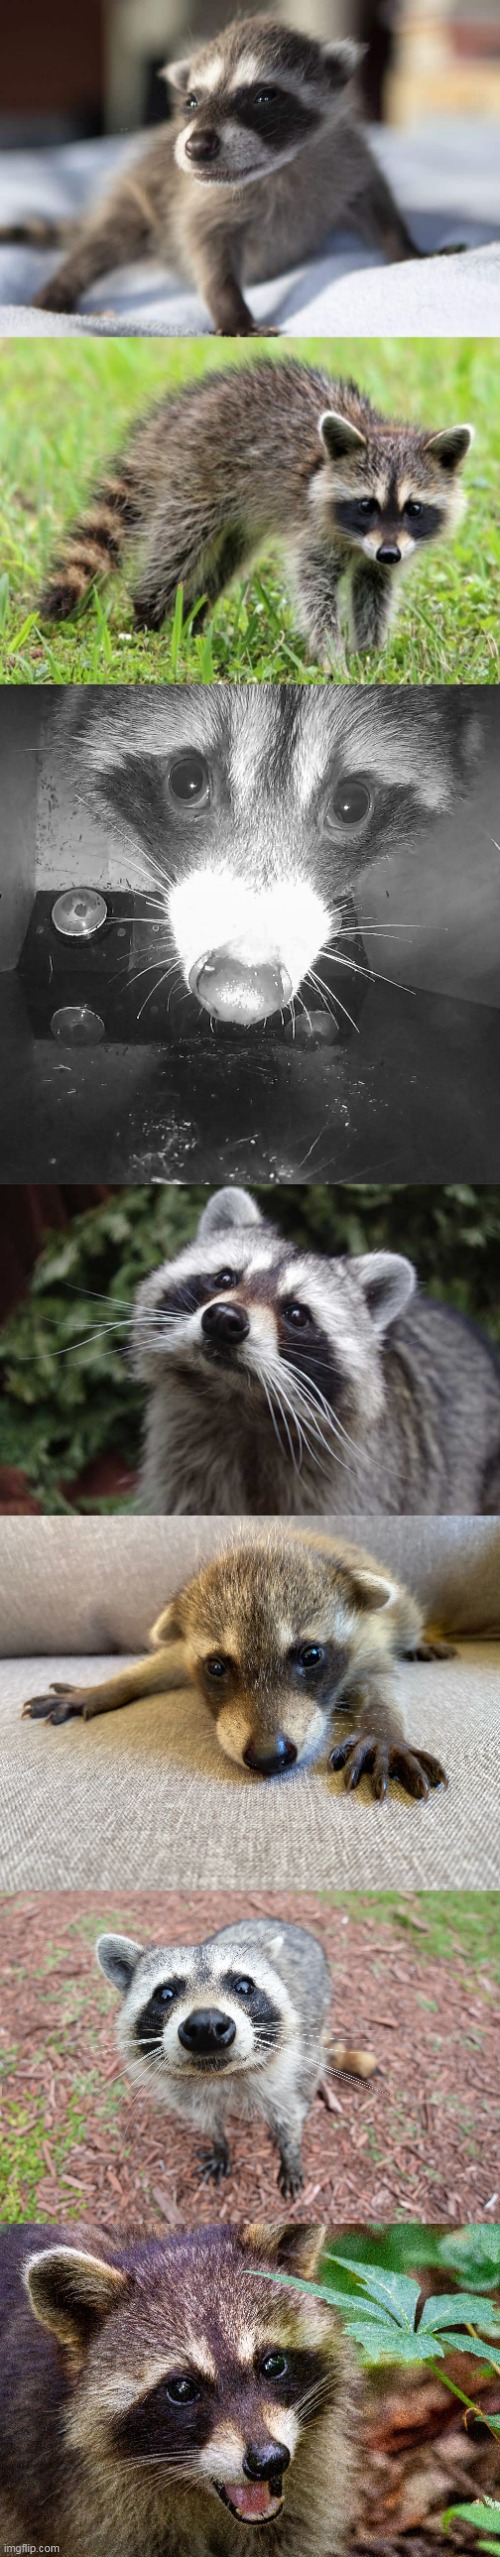 Some Raccoons :) | image tagged in raccoon,adorable | made w/ Imgflip meme maker